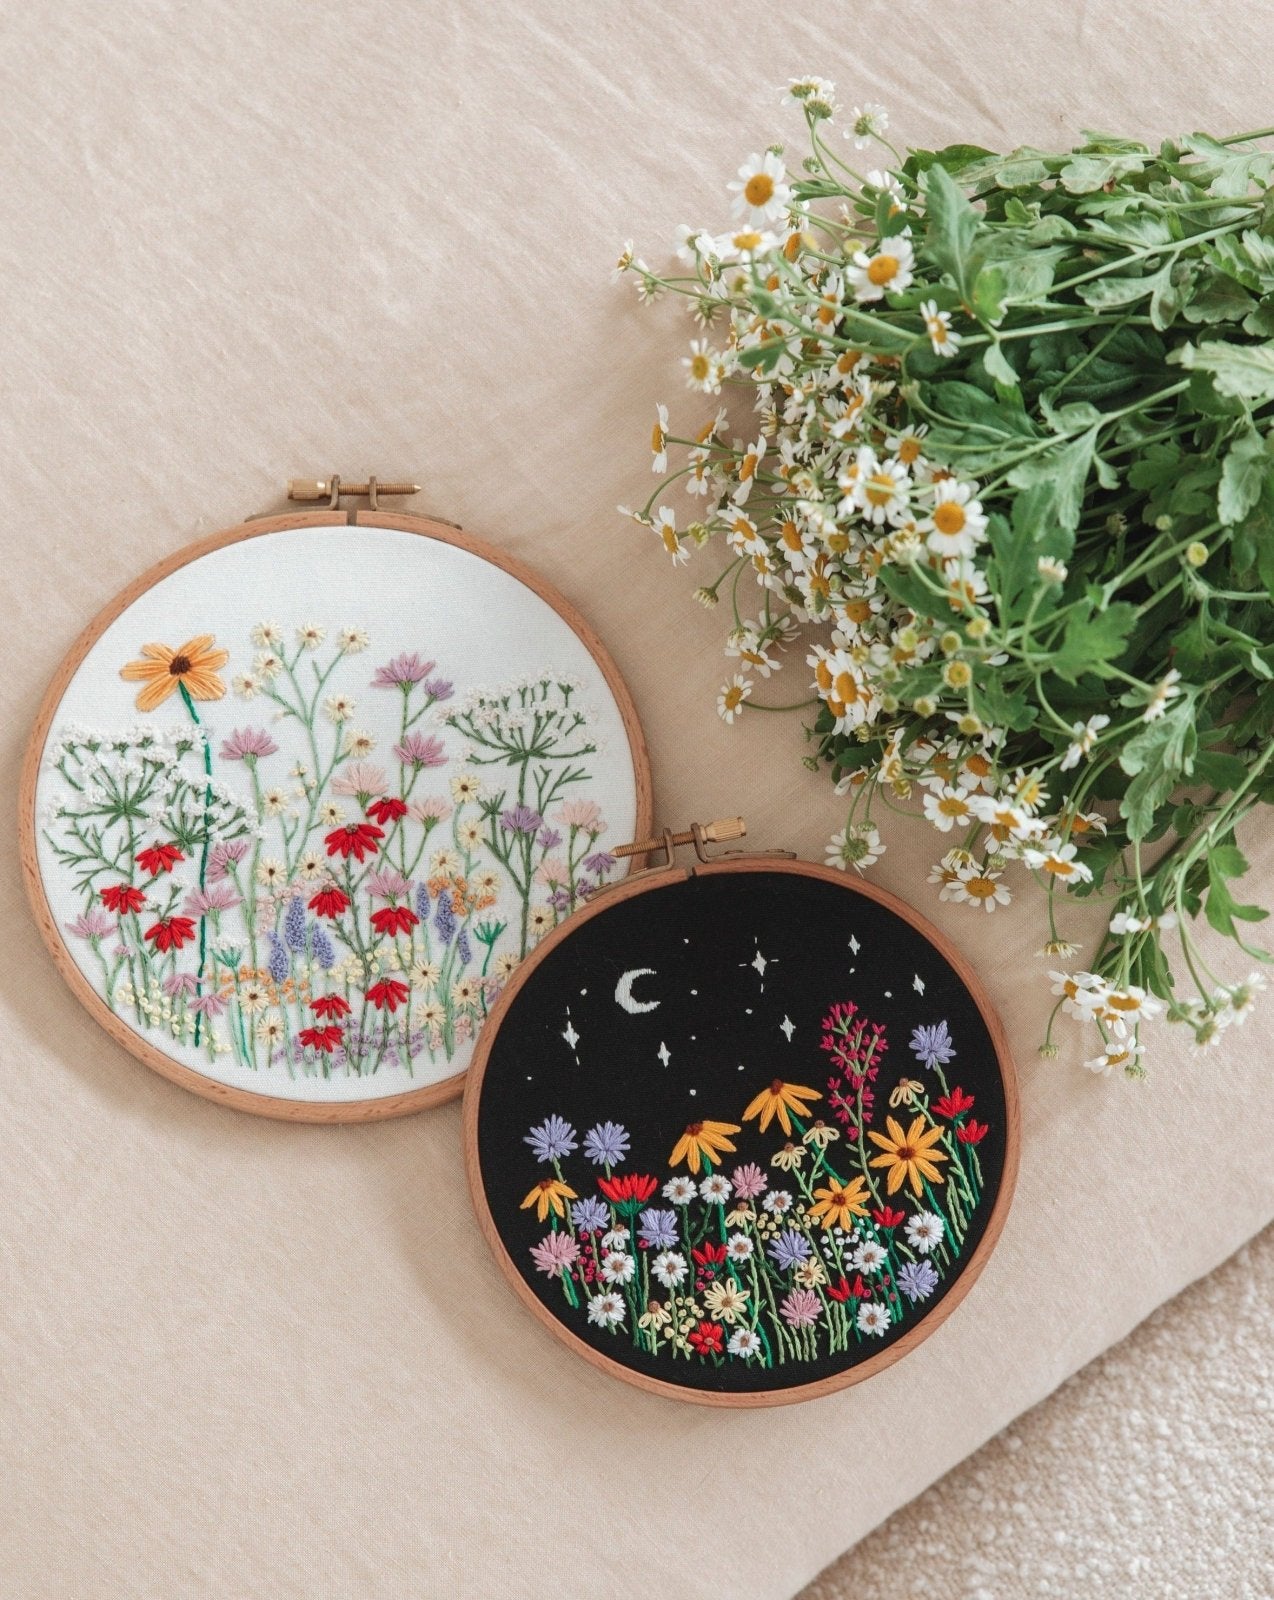 Meadow Wildflowers Embroidery Kit - Stitched Up Kits